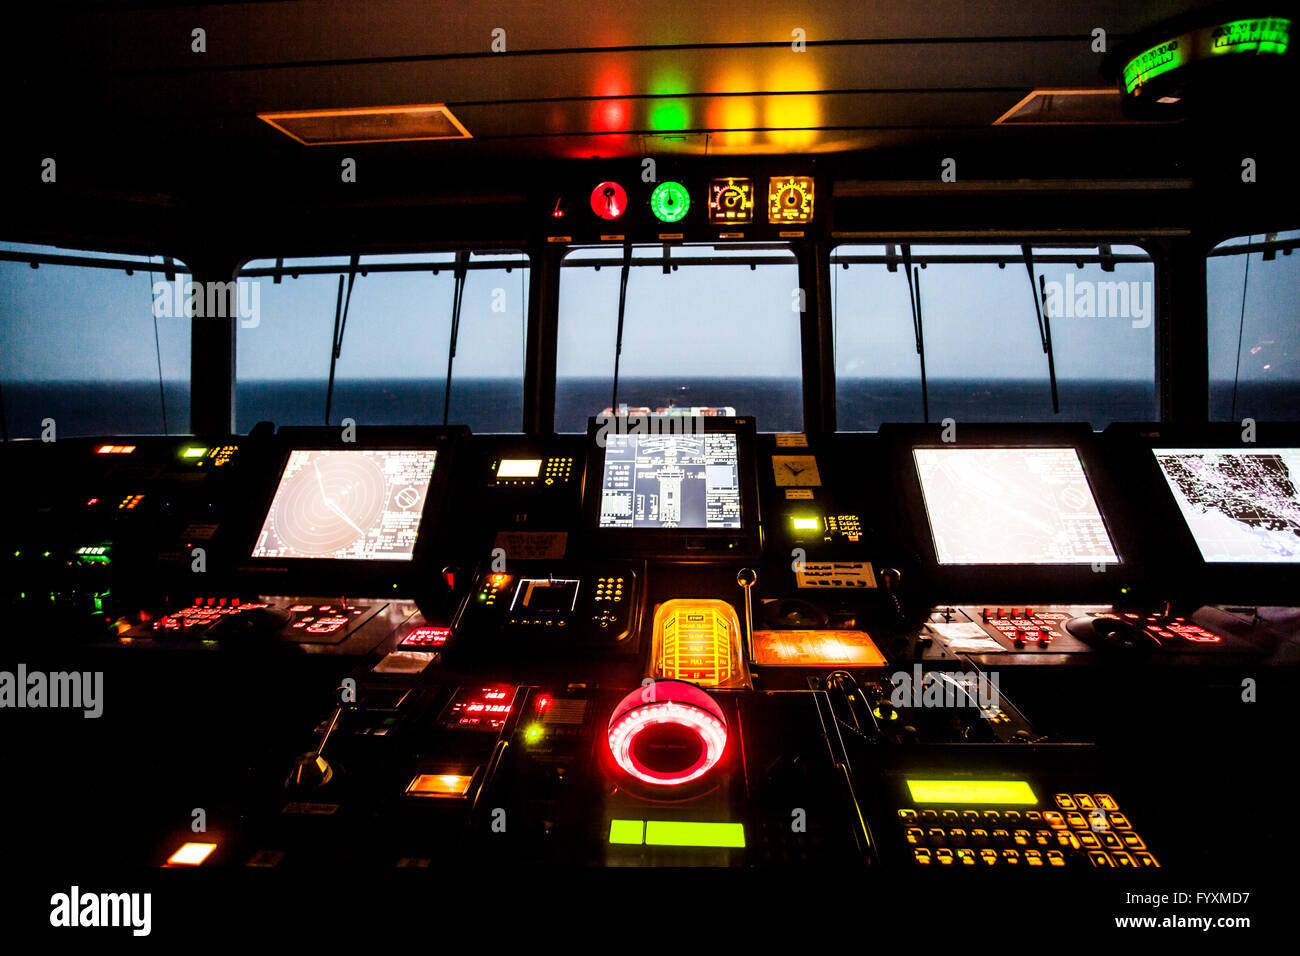 Navigation deck on board a container ship at sea during the early hours of the night. Stock Photo